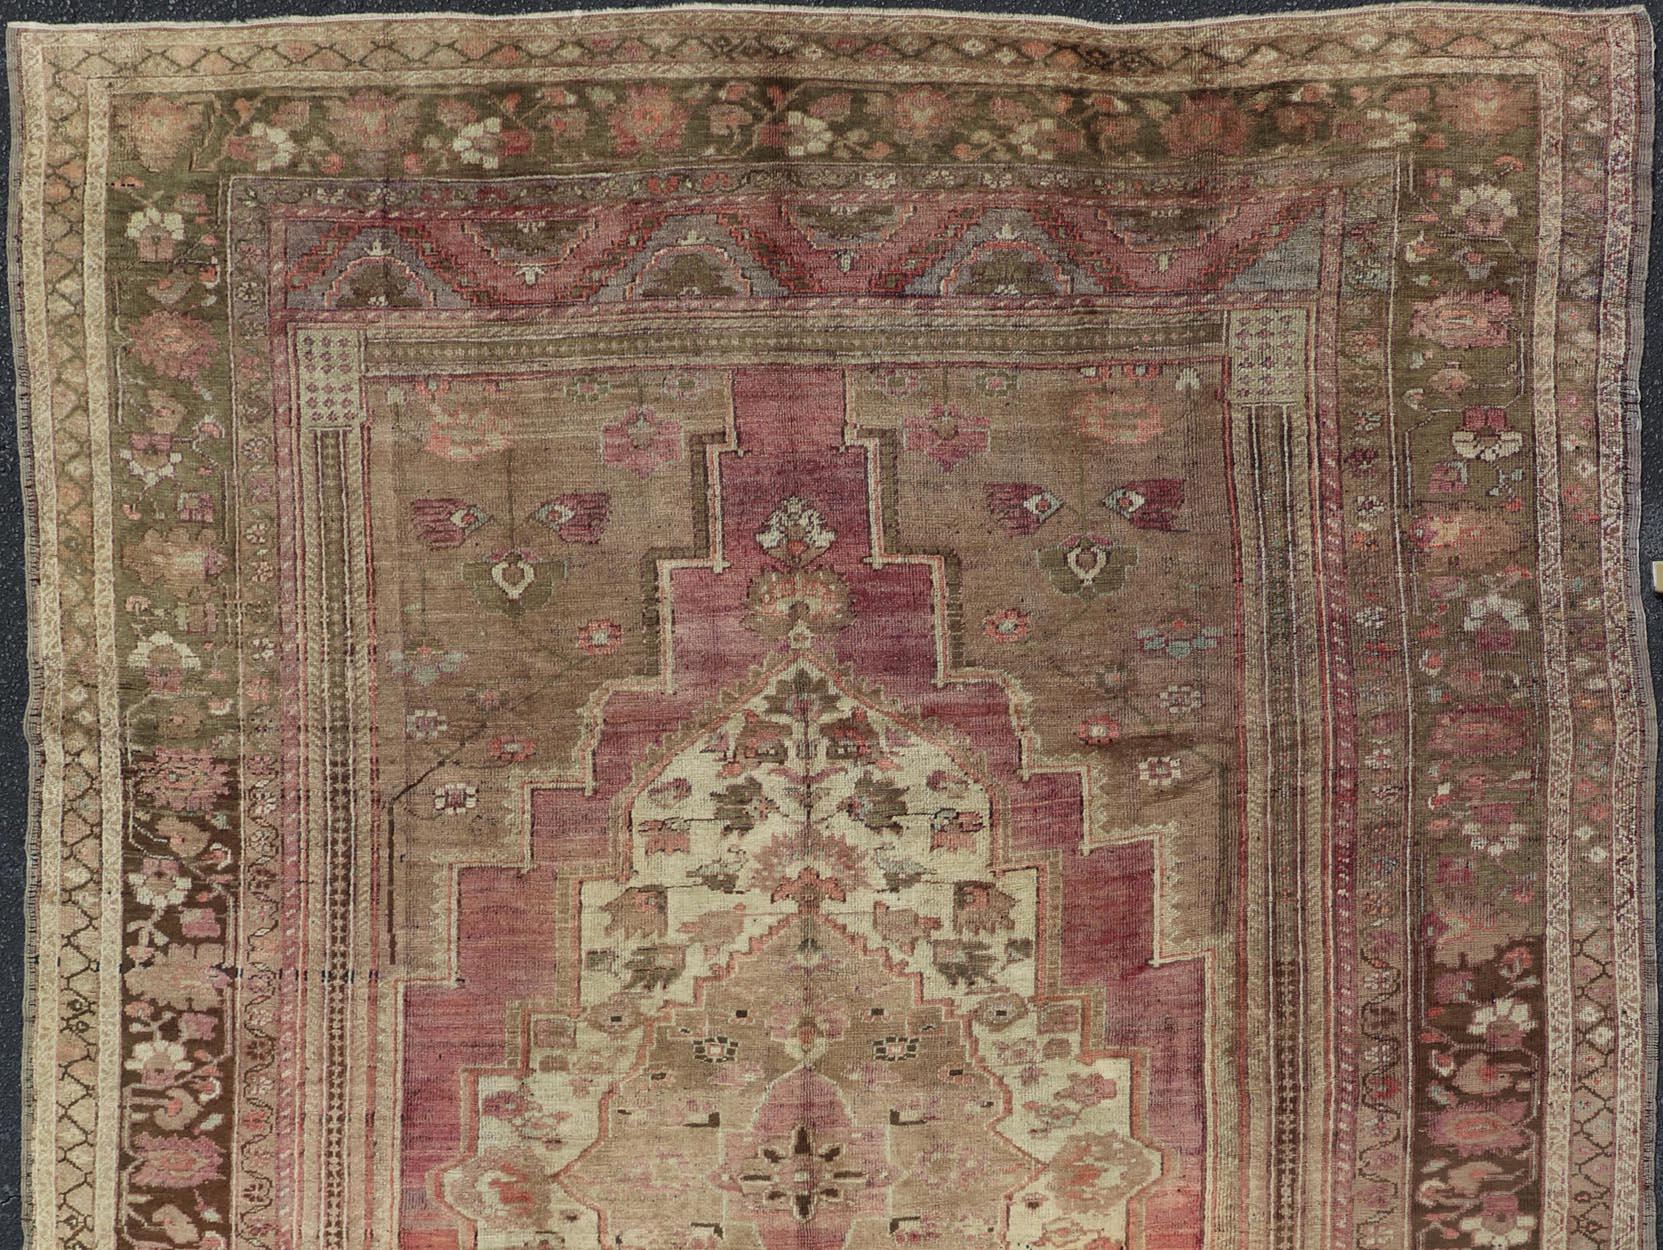 Vintage carpet from Turkey in light purple, light brown, camel ivory tones, rug KBE-26, country of origin / type: Turkey / Oushak, circa 1940

This vintage Turkish Oushak rug features an intricately designed medallion resting in the central field.